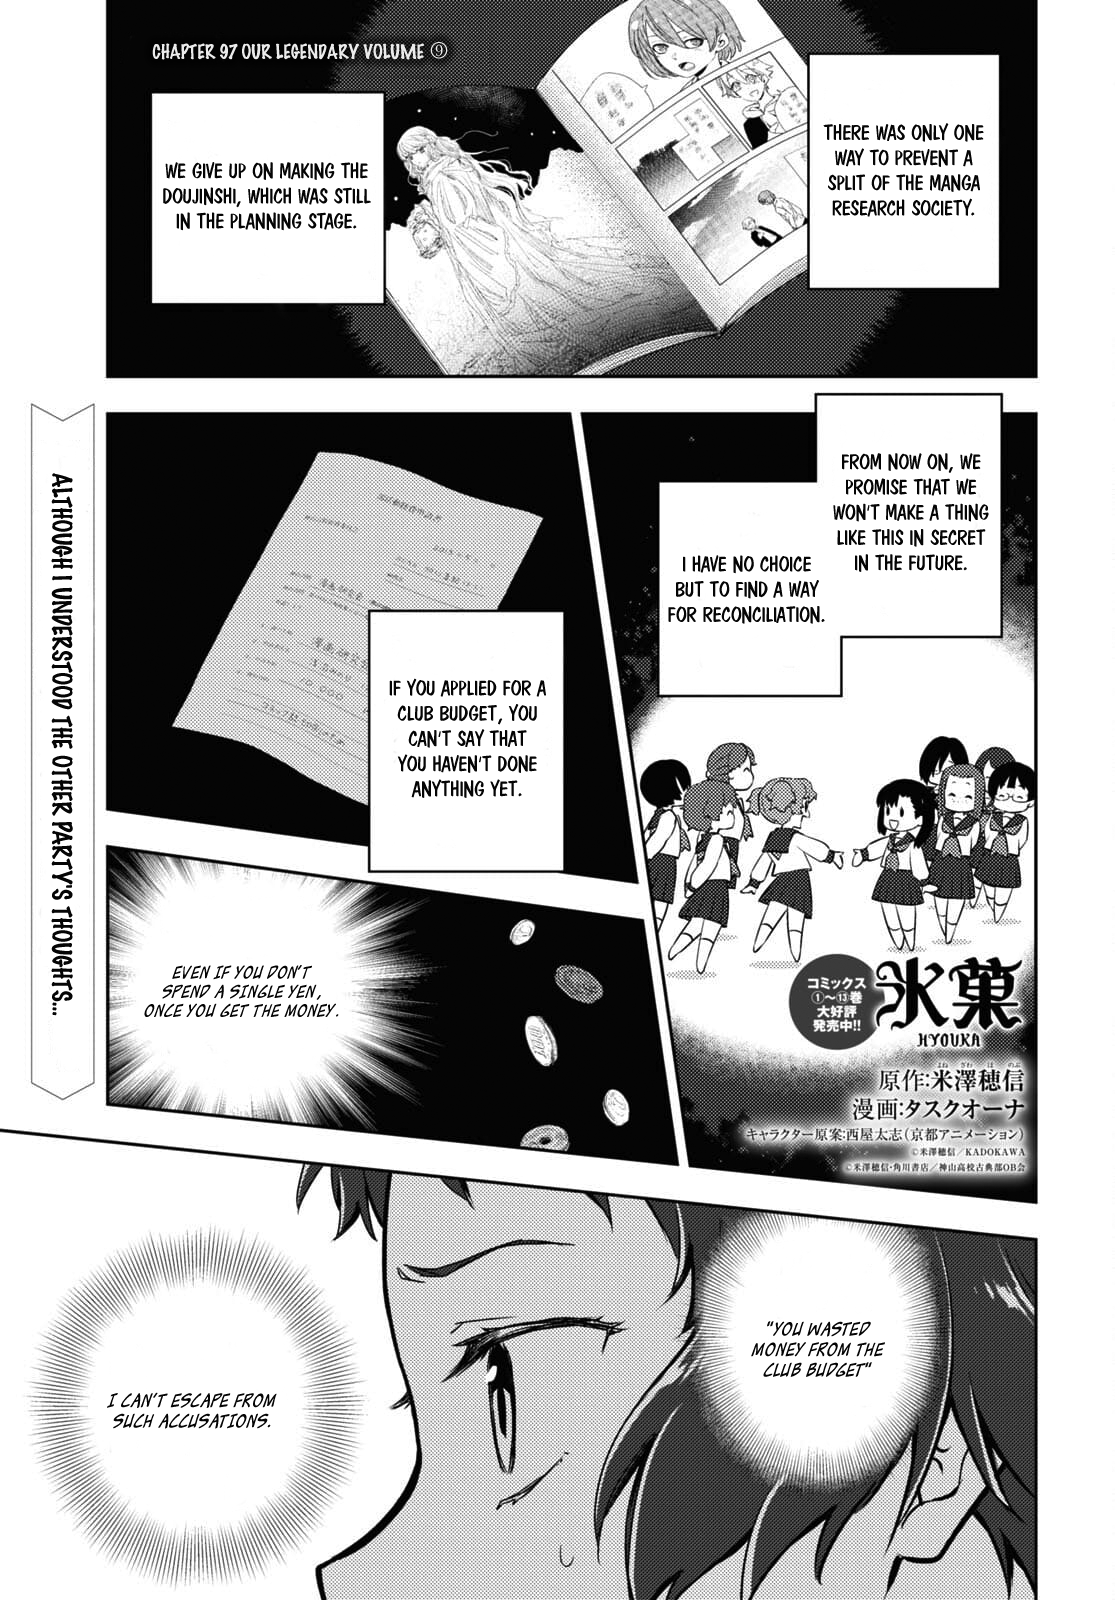 Hyouka Chapter 97: Our Legendary Volume ⑨ - Picture 1